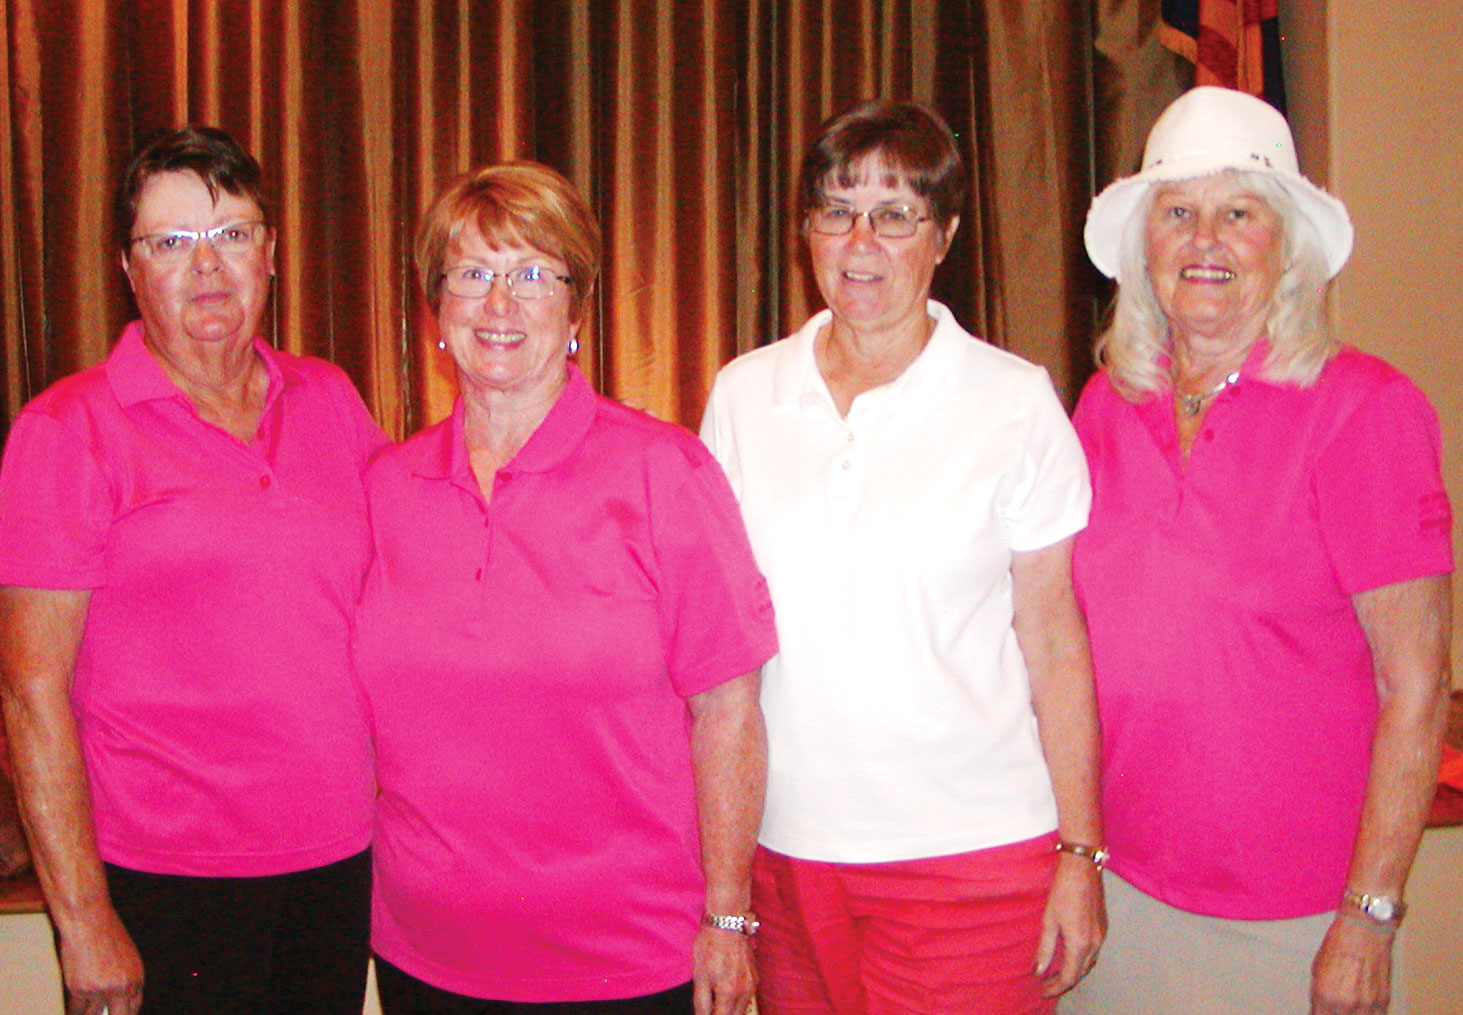 President’s Cup winners, left to right: Karyle Steele, Linda Rouse, Karen Koch, Marilyn Horn; photo courtesy of Holly Riviere